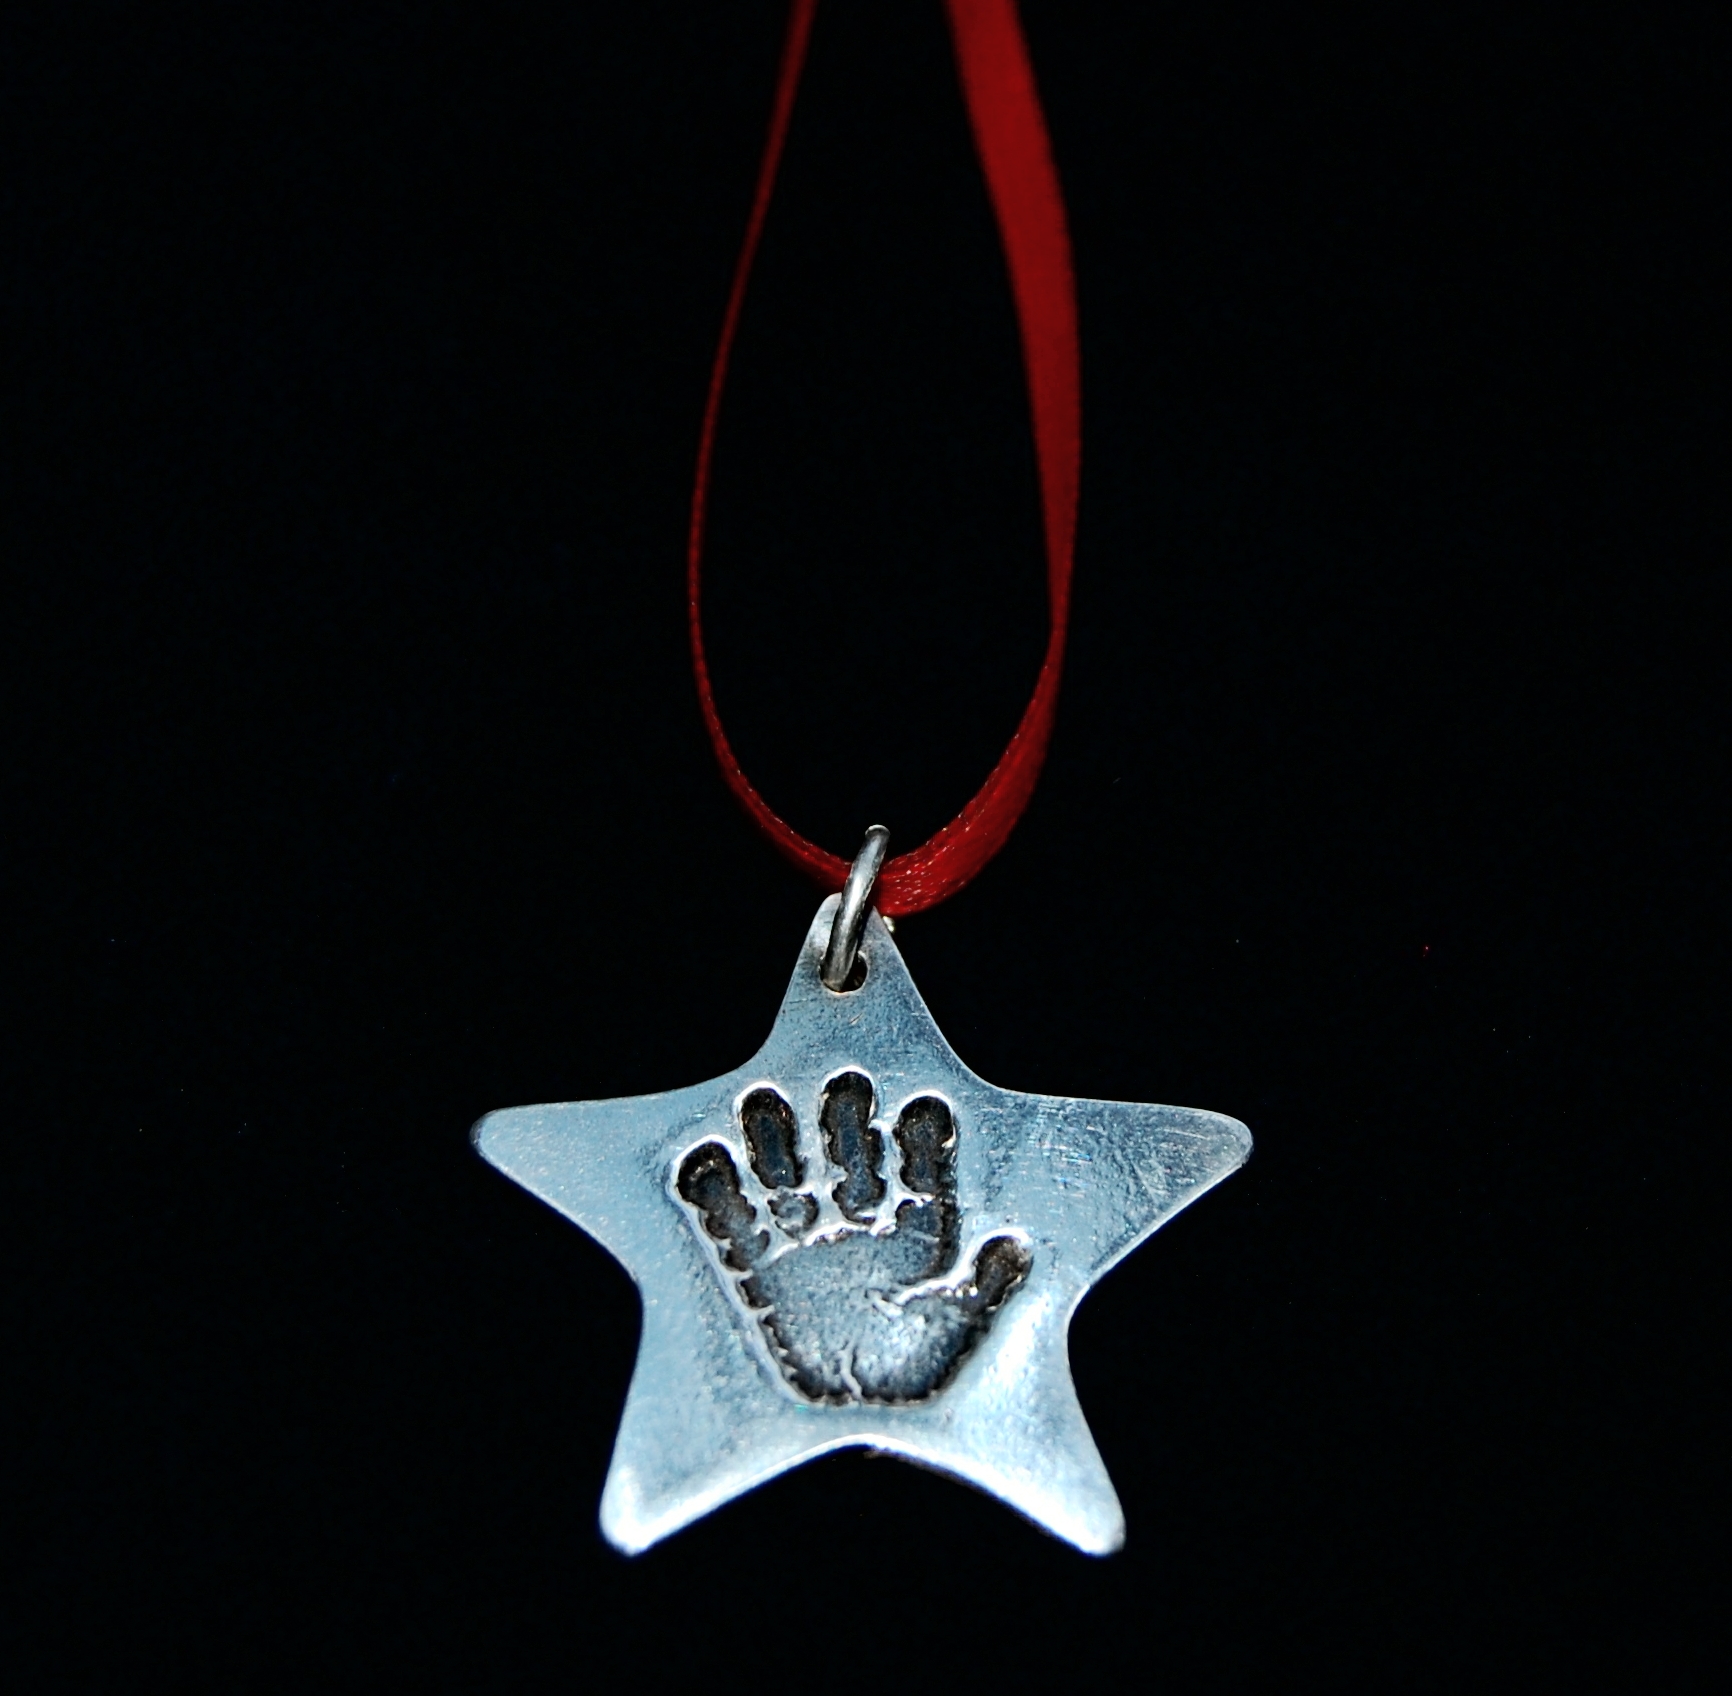 Regular silver star handprint charm with gorgeous red ribbon ready to hand in pride of place on your Christmas tree.